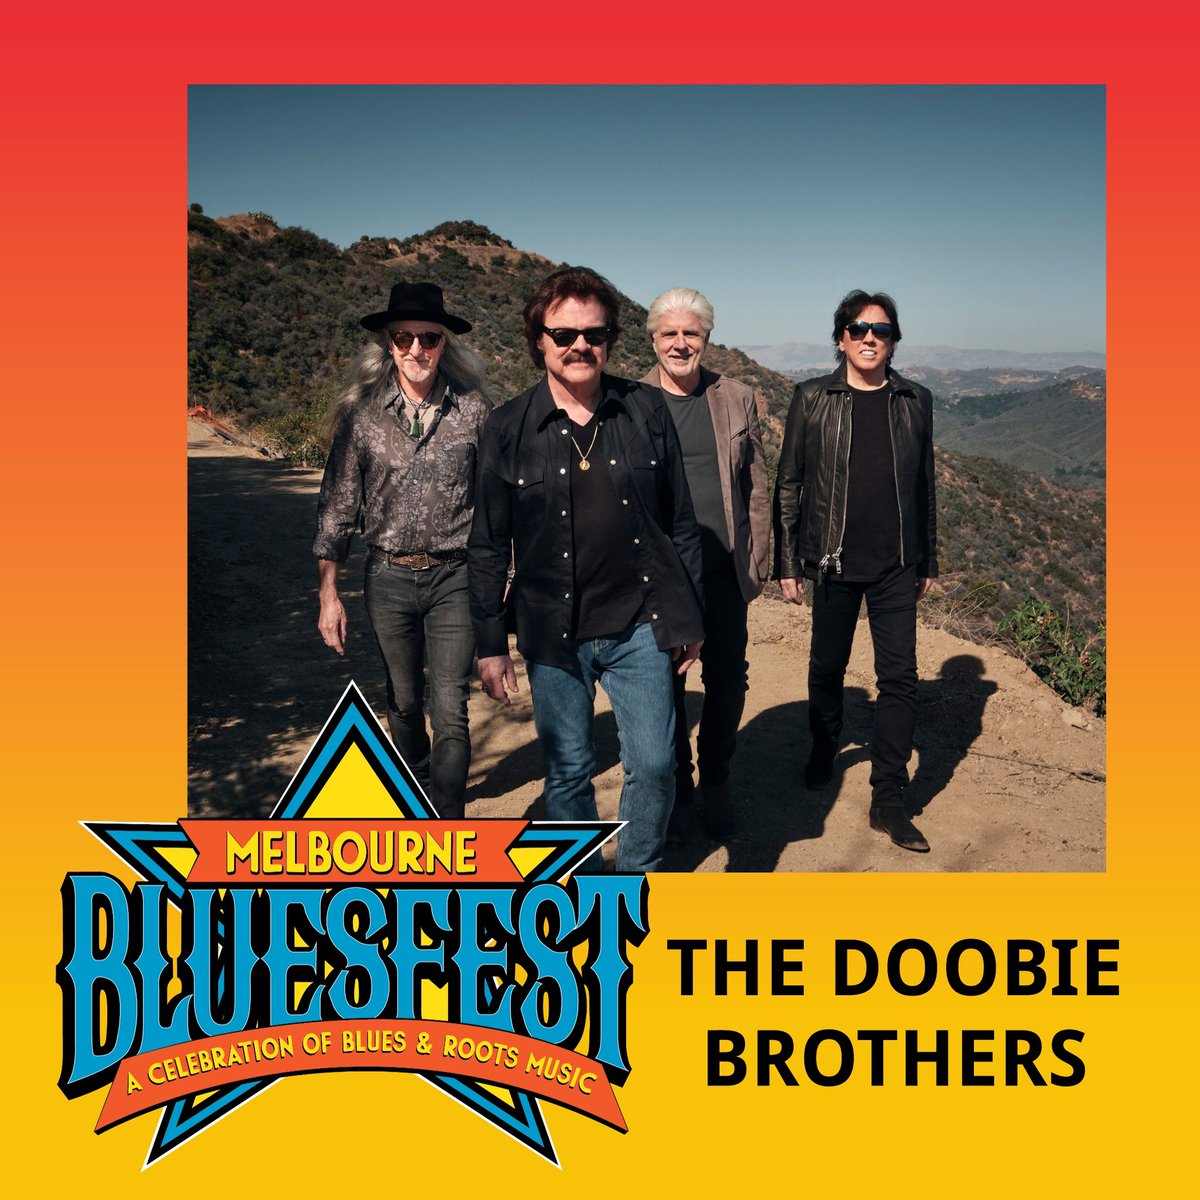 The Doobie Brothers - Tom Johnston, Pat Simmons, John McFee & Michael McDonald will be performing at Bluesfest Melbourne on Saturday, April 8th, 2023. Tickets are on sale now. For more information visit bluesfestmelbourne.com.au